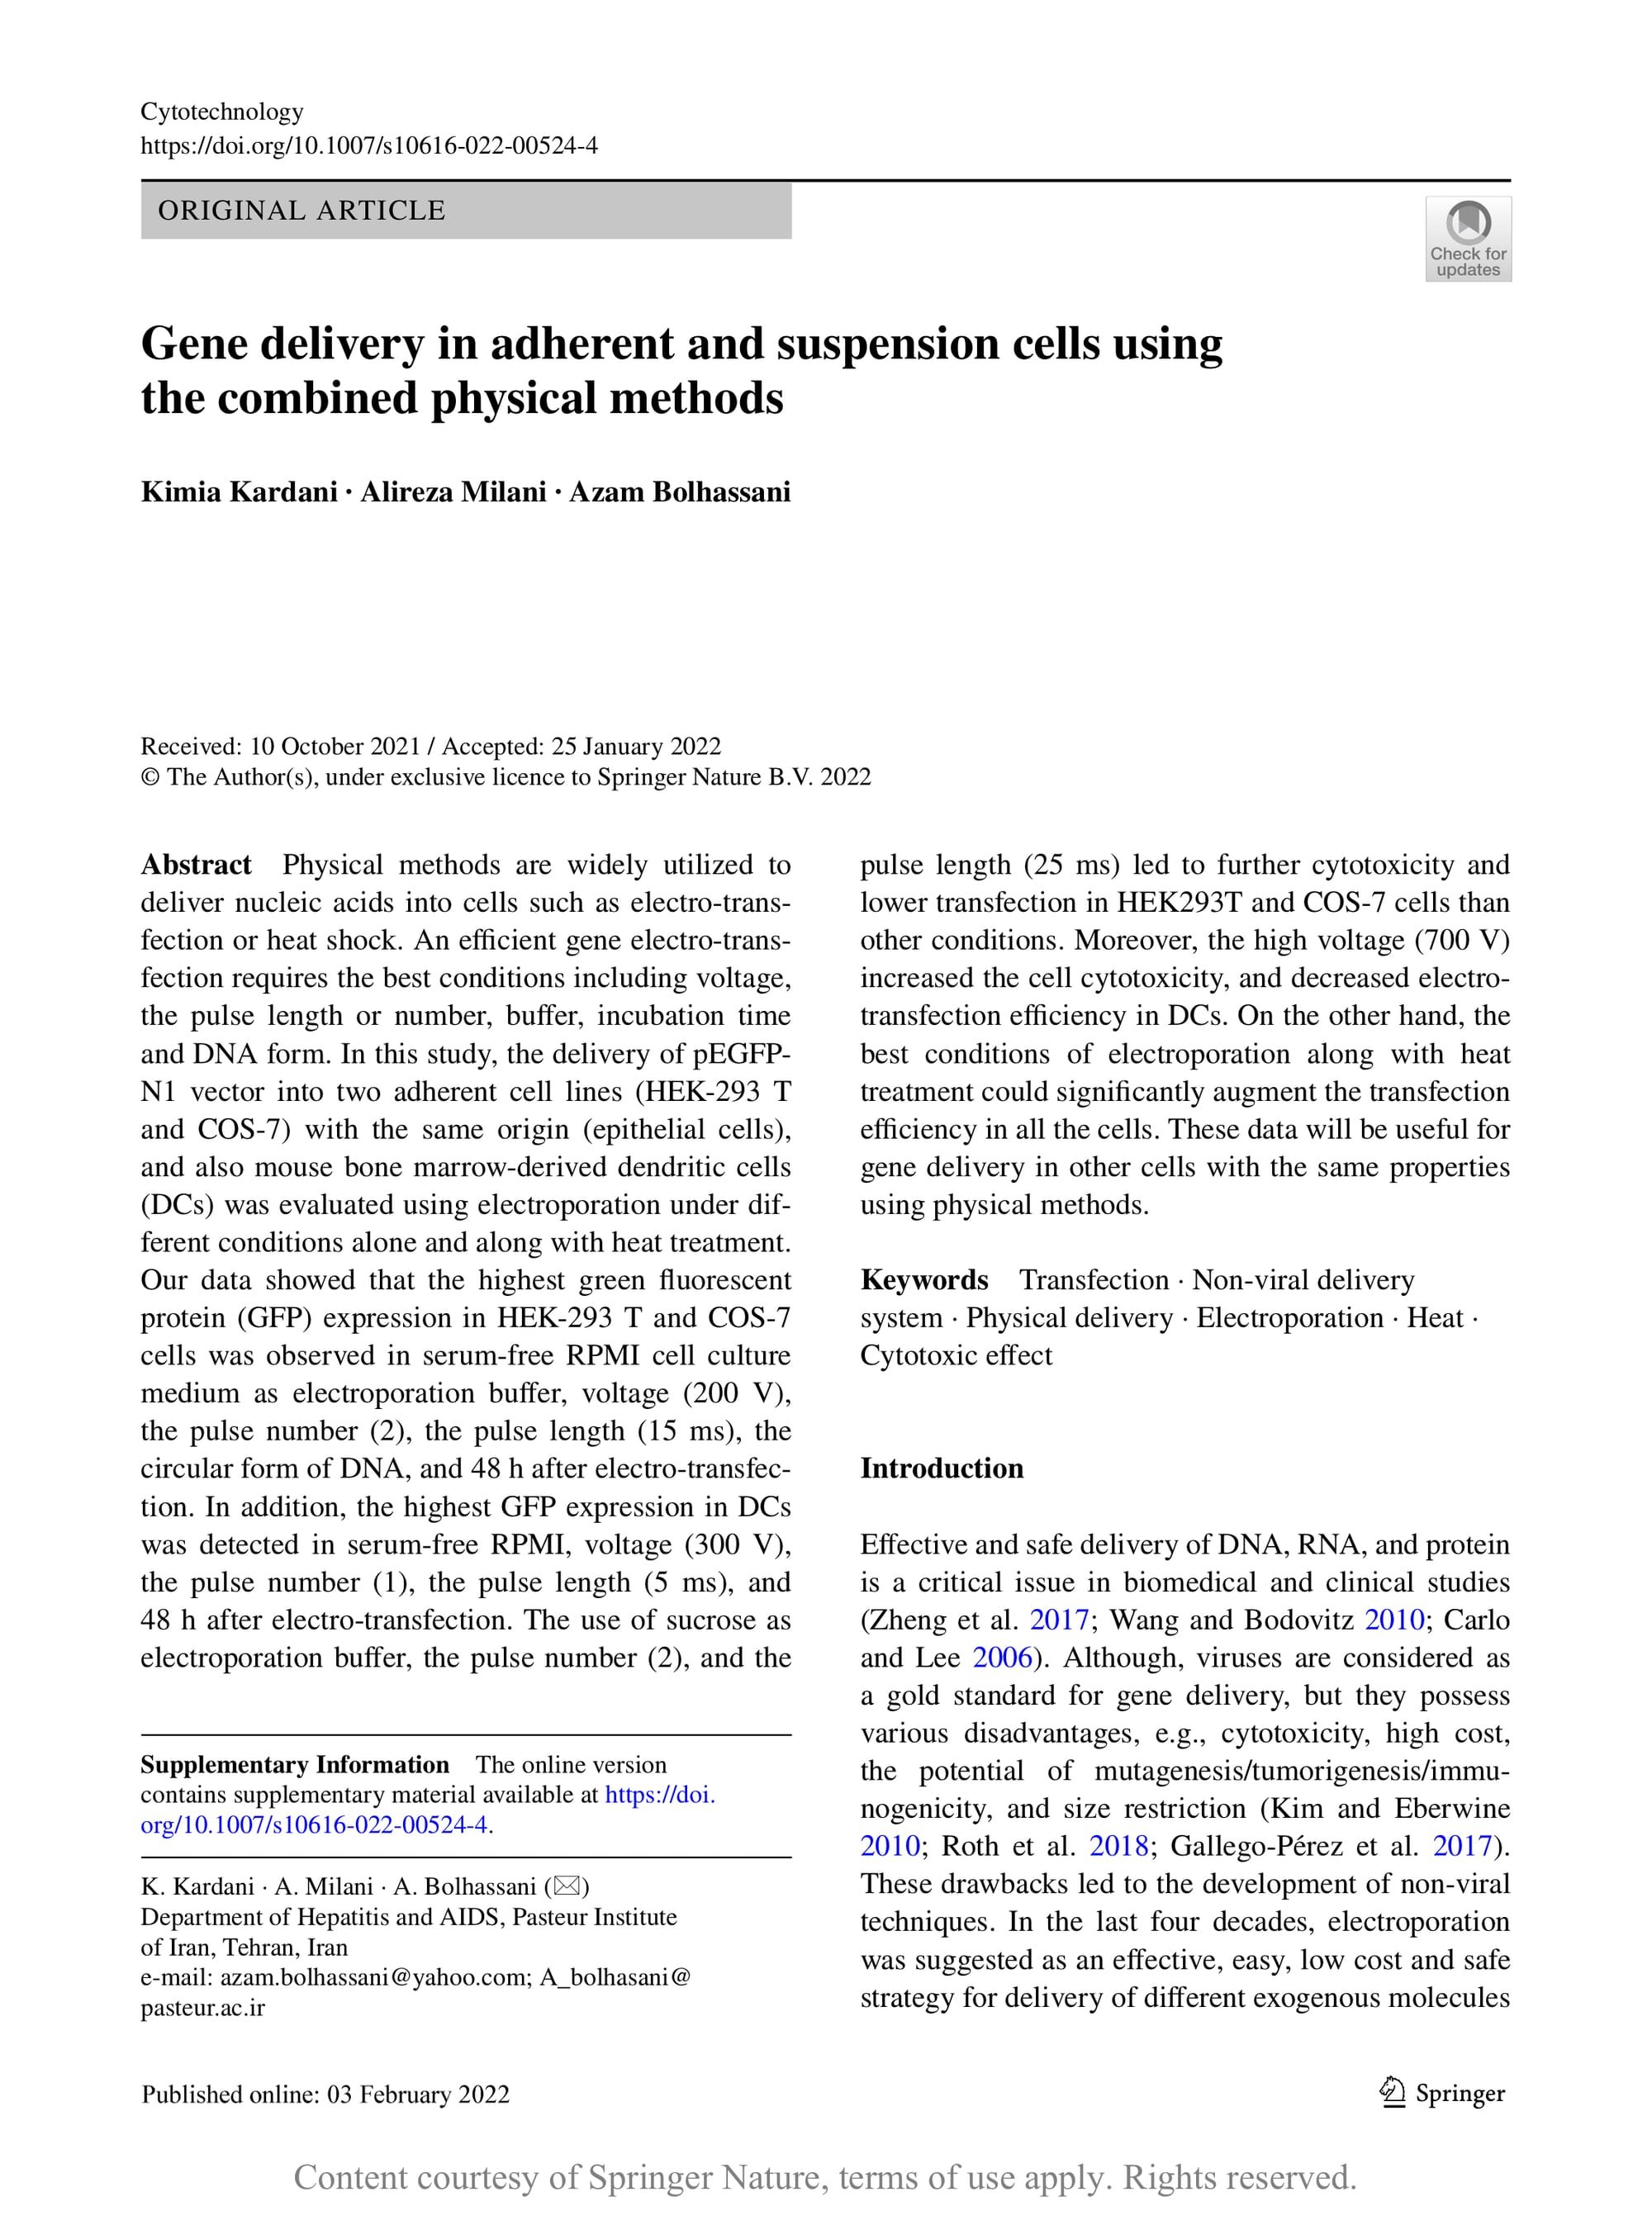 Gene delivery in adherent and suspension cells using the combined physical methods